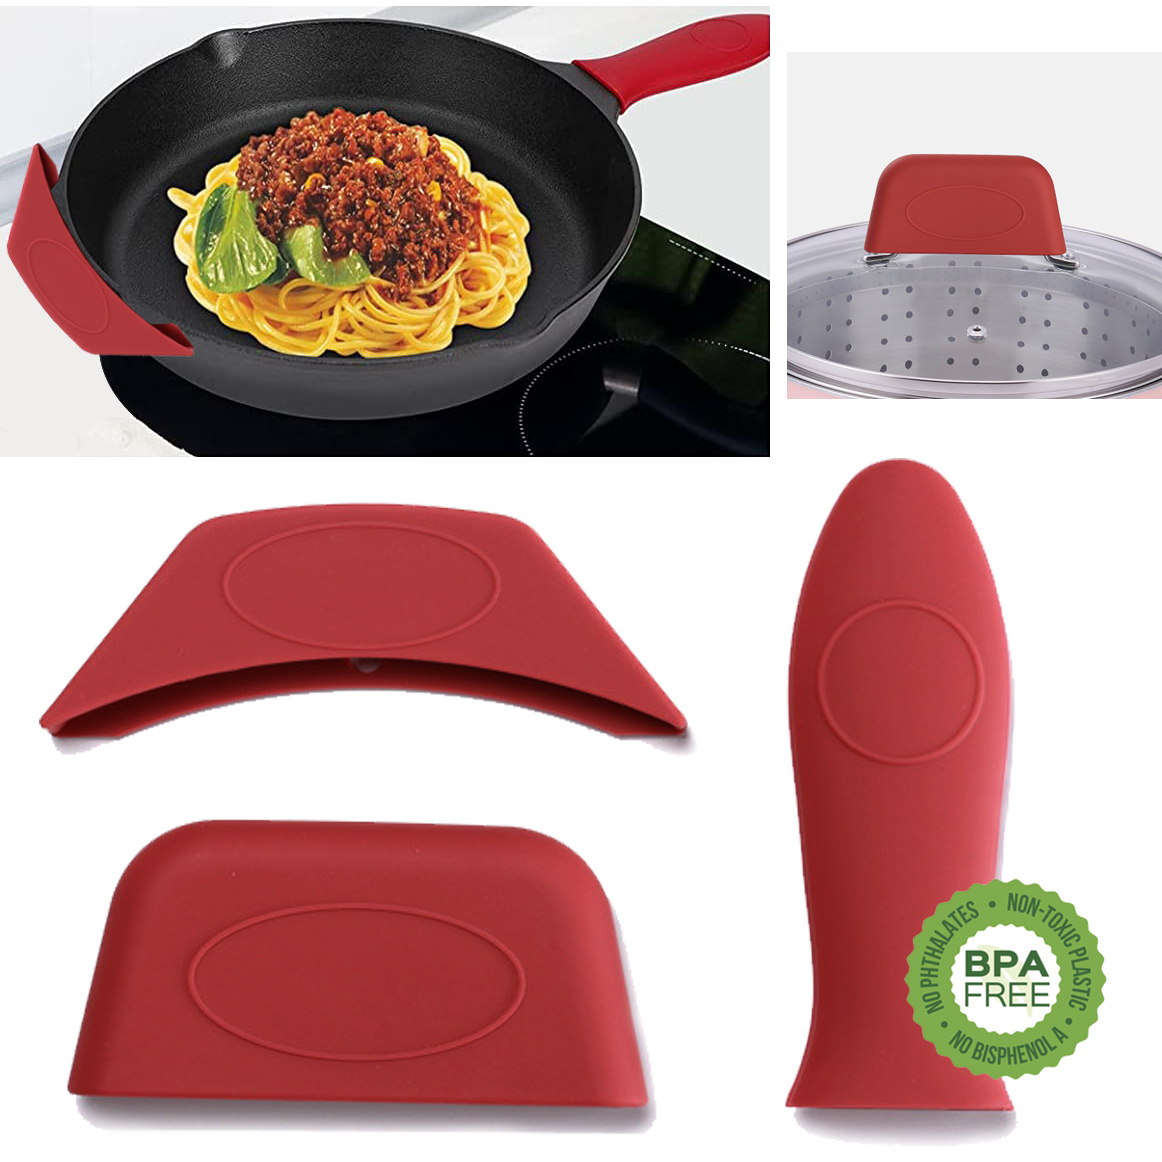 SAIKOOWA Silicone Pan Handle Sleeve,Cast Iron Handle Cover for Frying  Pan,Spatulas,Skillet, Wok, Pot…See more SAIKOOWA Silicone Pan Handle  Sleeve,Cast